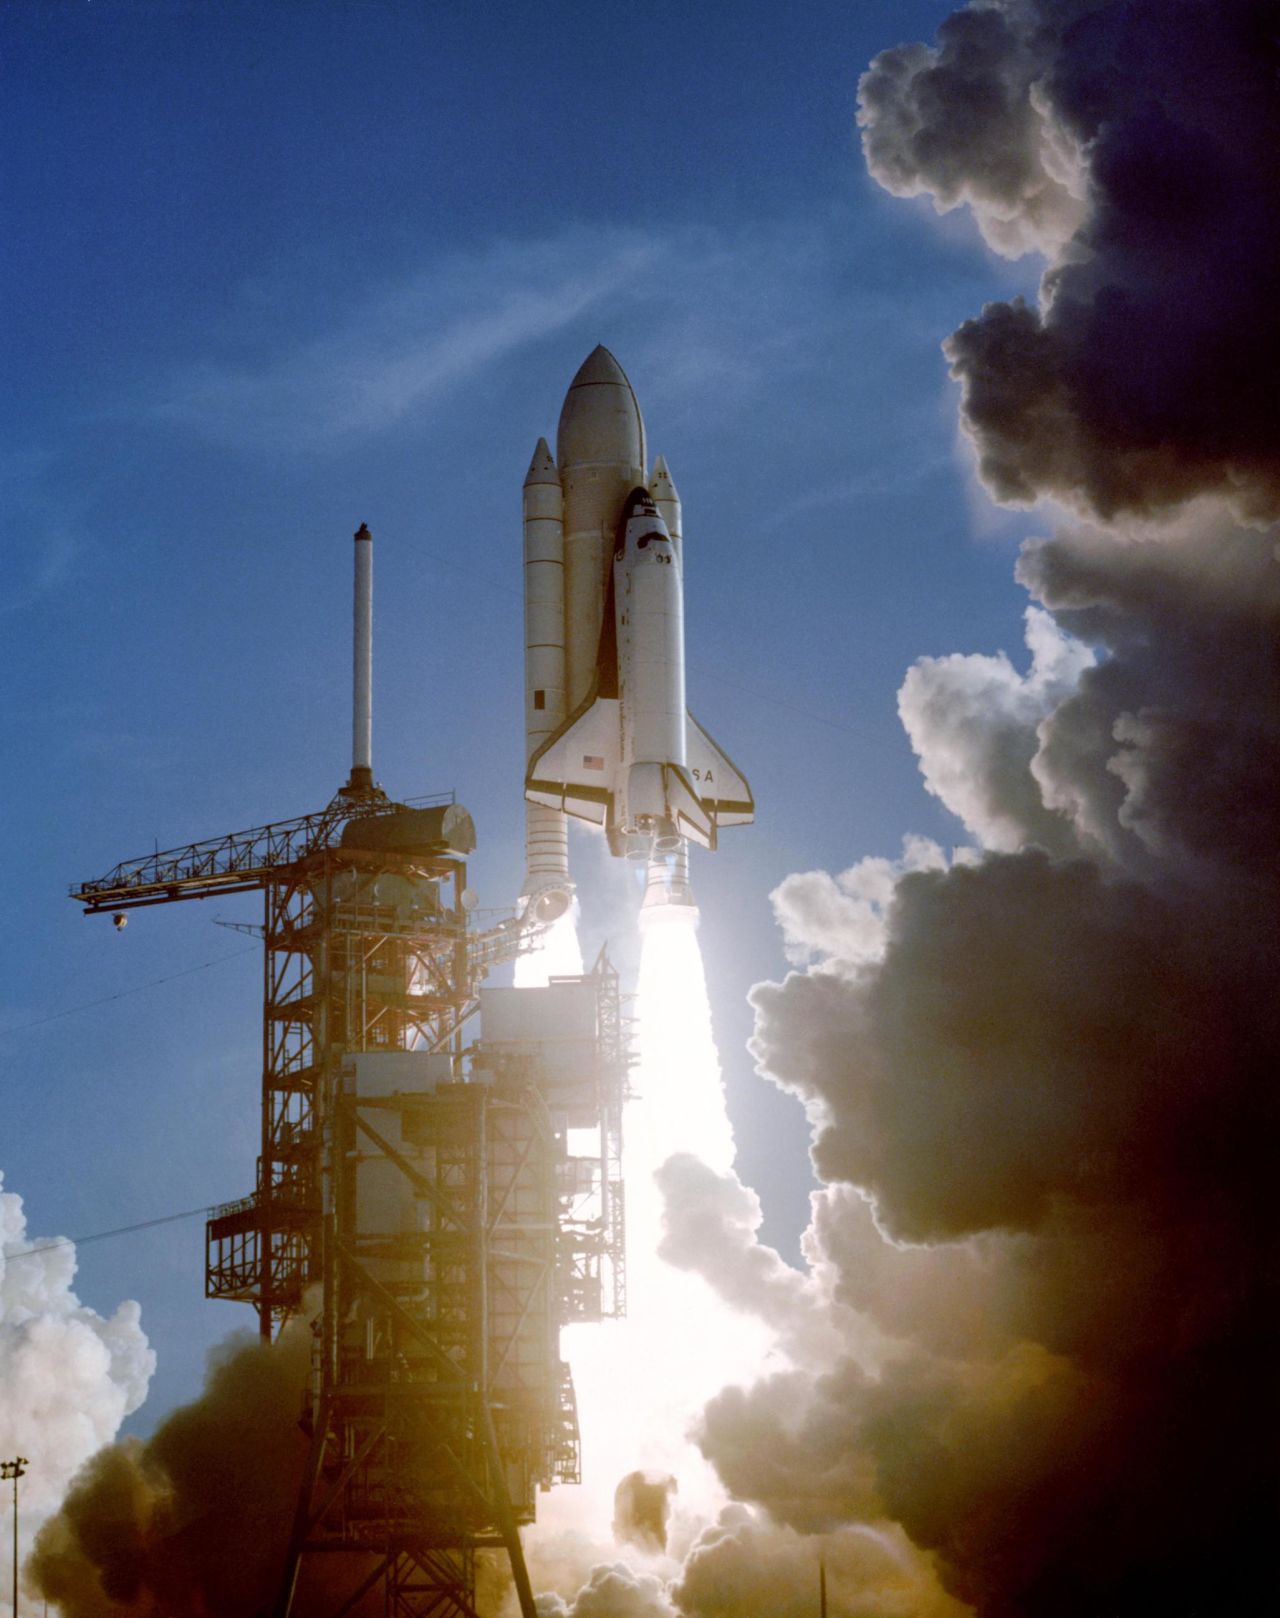 <strong>1981: </strong>Columbia was the first space shuttle to fly in space. The shuttles were designed as reusable vehicles to ferry satellites and components into orbit, to build the International Space Station (ISS). But in 2003, on its 28th flight, the space shuttle broke up on its return to Earth, <a href="https://www.britannica.com/event/Columbia-disaster" target="_blank" target="_blank">killing all seven astronauts on board</a>. NASA suspended space shuttle flights for more than two years as it investigated the disaster. <br />